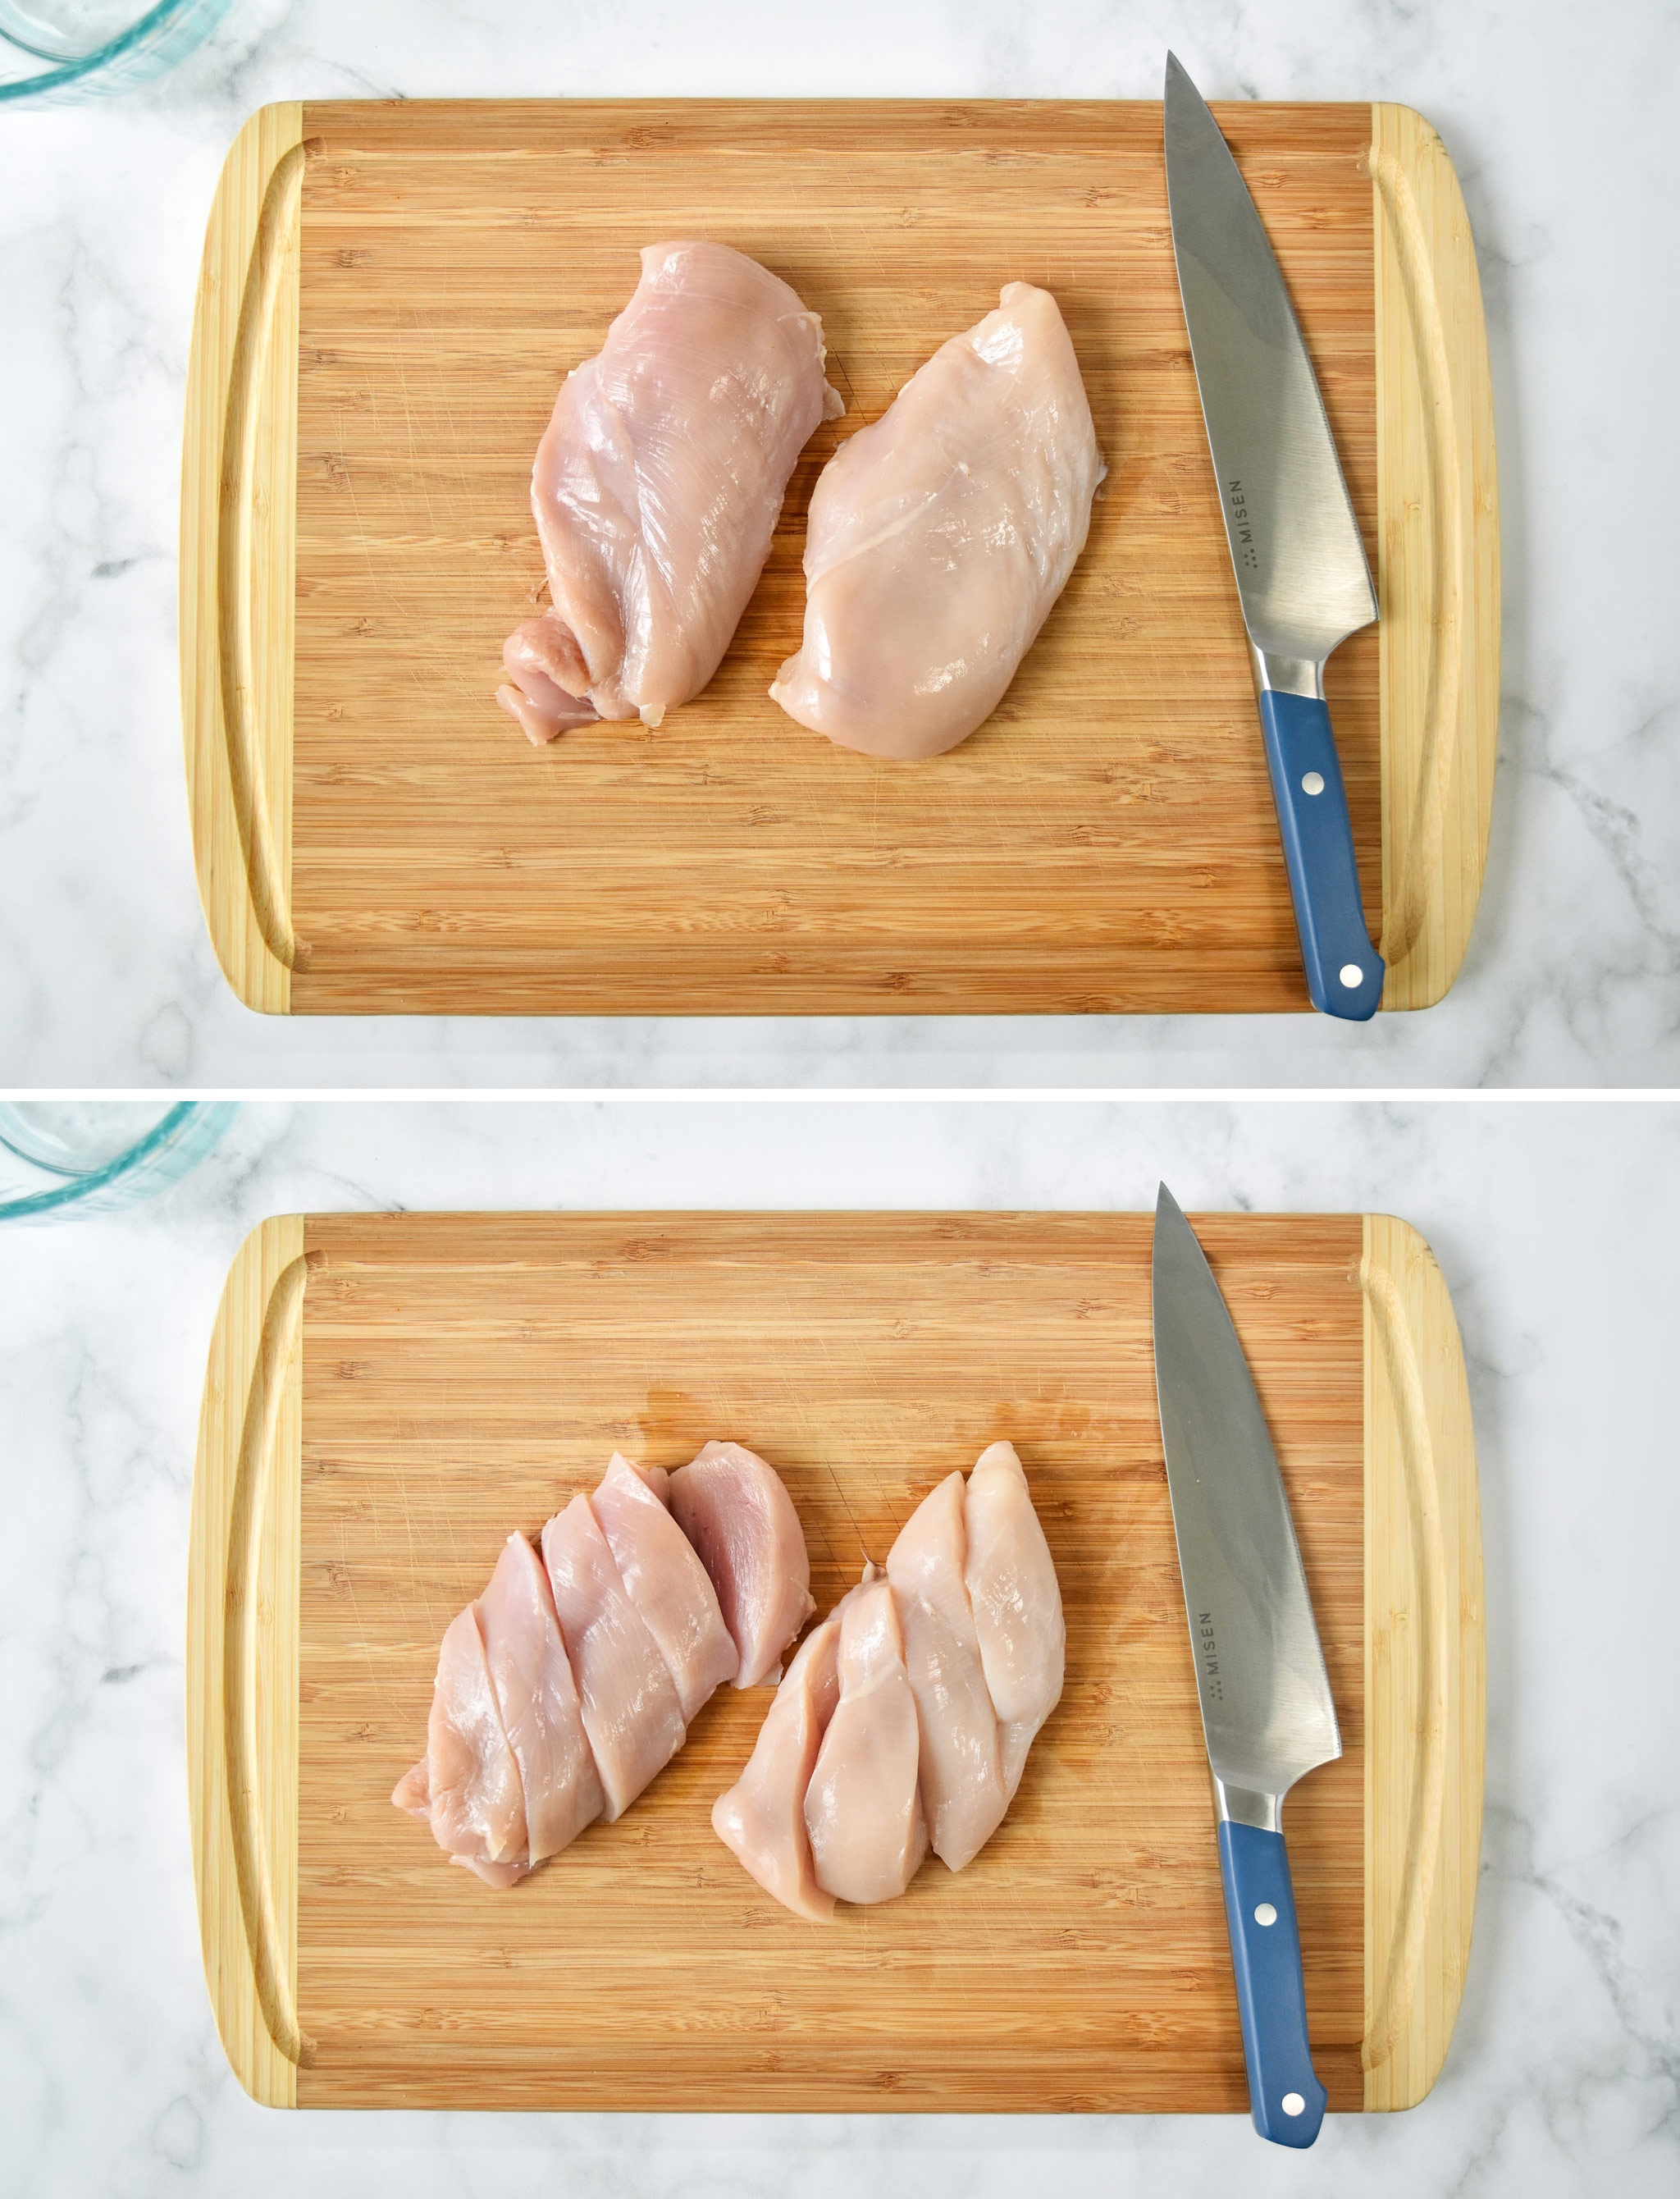 cutting two chicken breasts into strips on a cutting board.